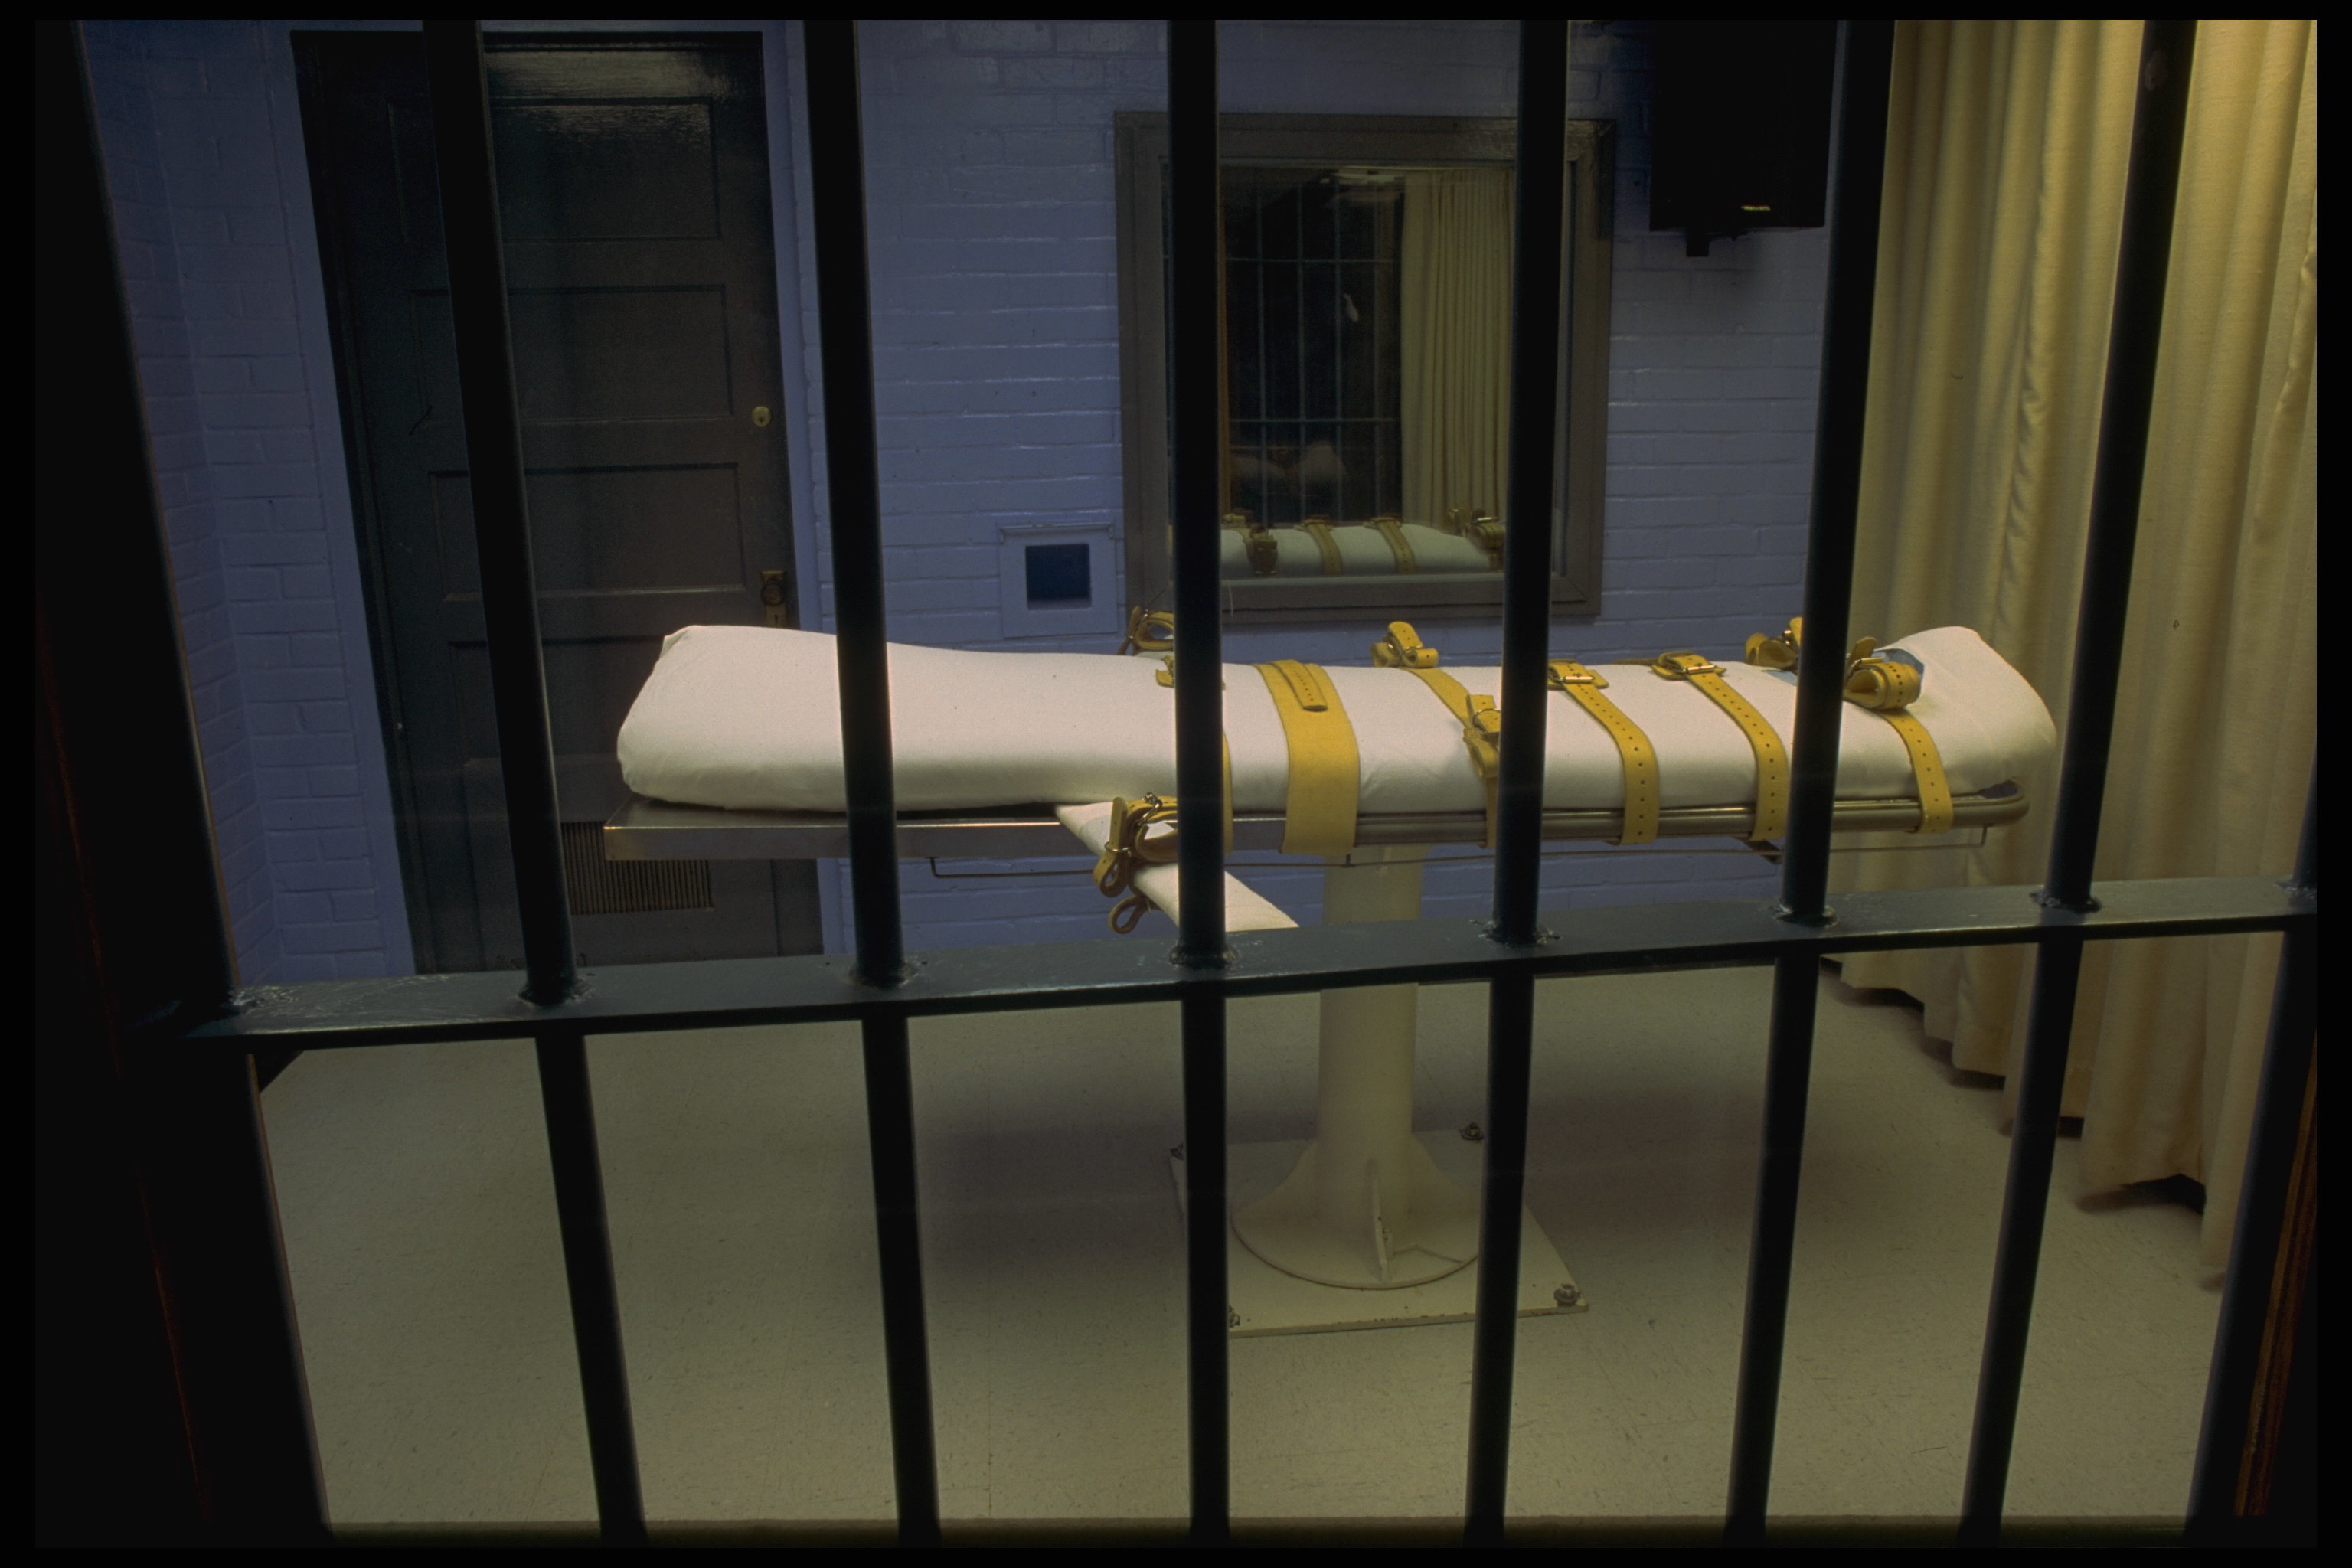 ROOM FOR EXECUTION BY LETHAL INJECTION IN TEXAS, Botched Lethal Injections, Reprieve, shots, Black prisoners, 